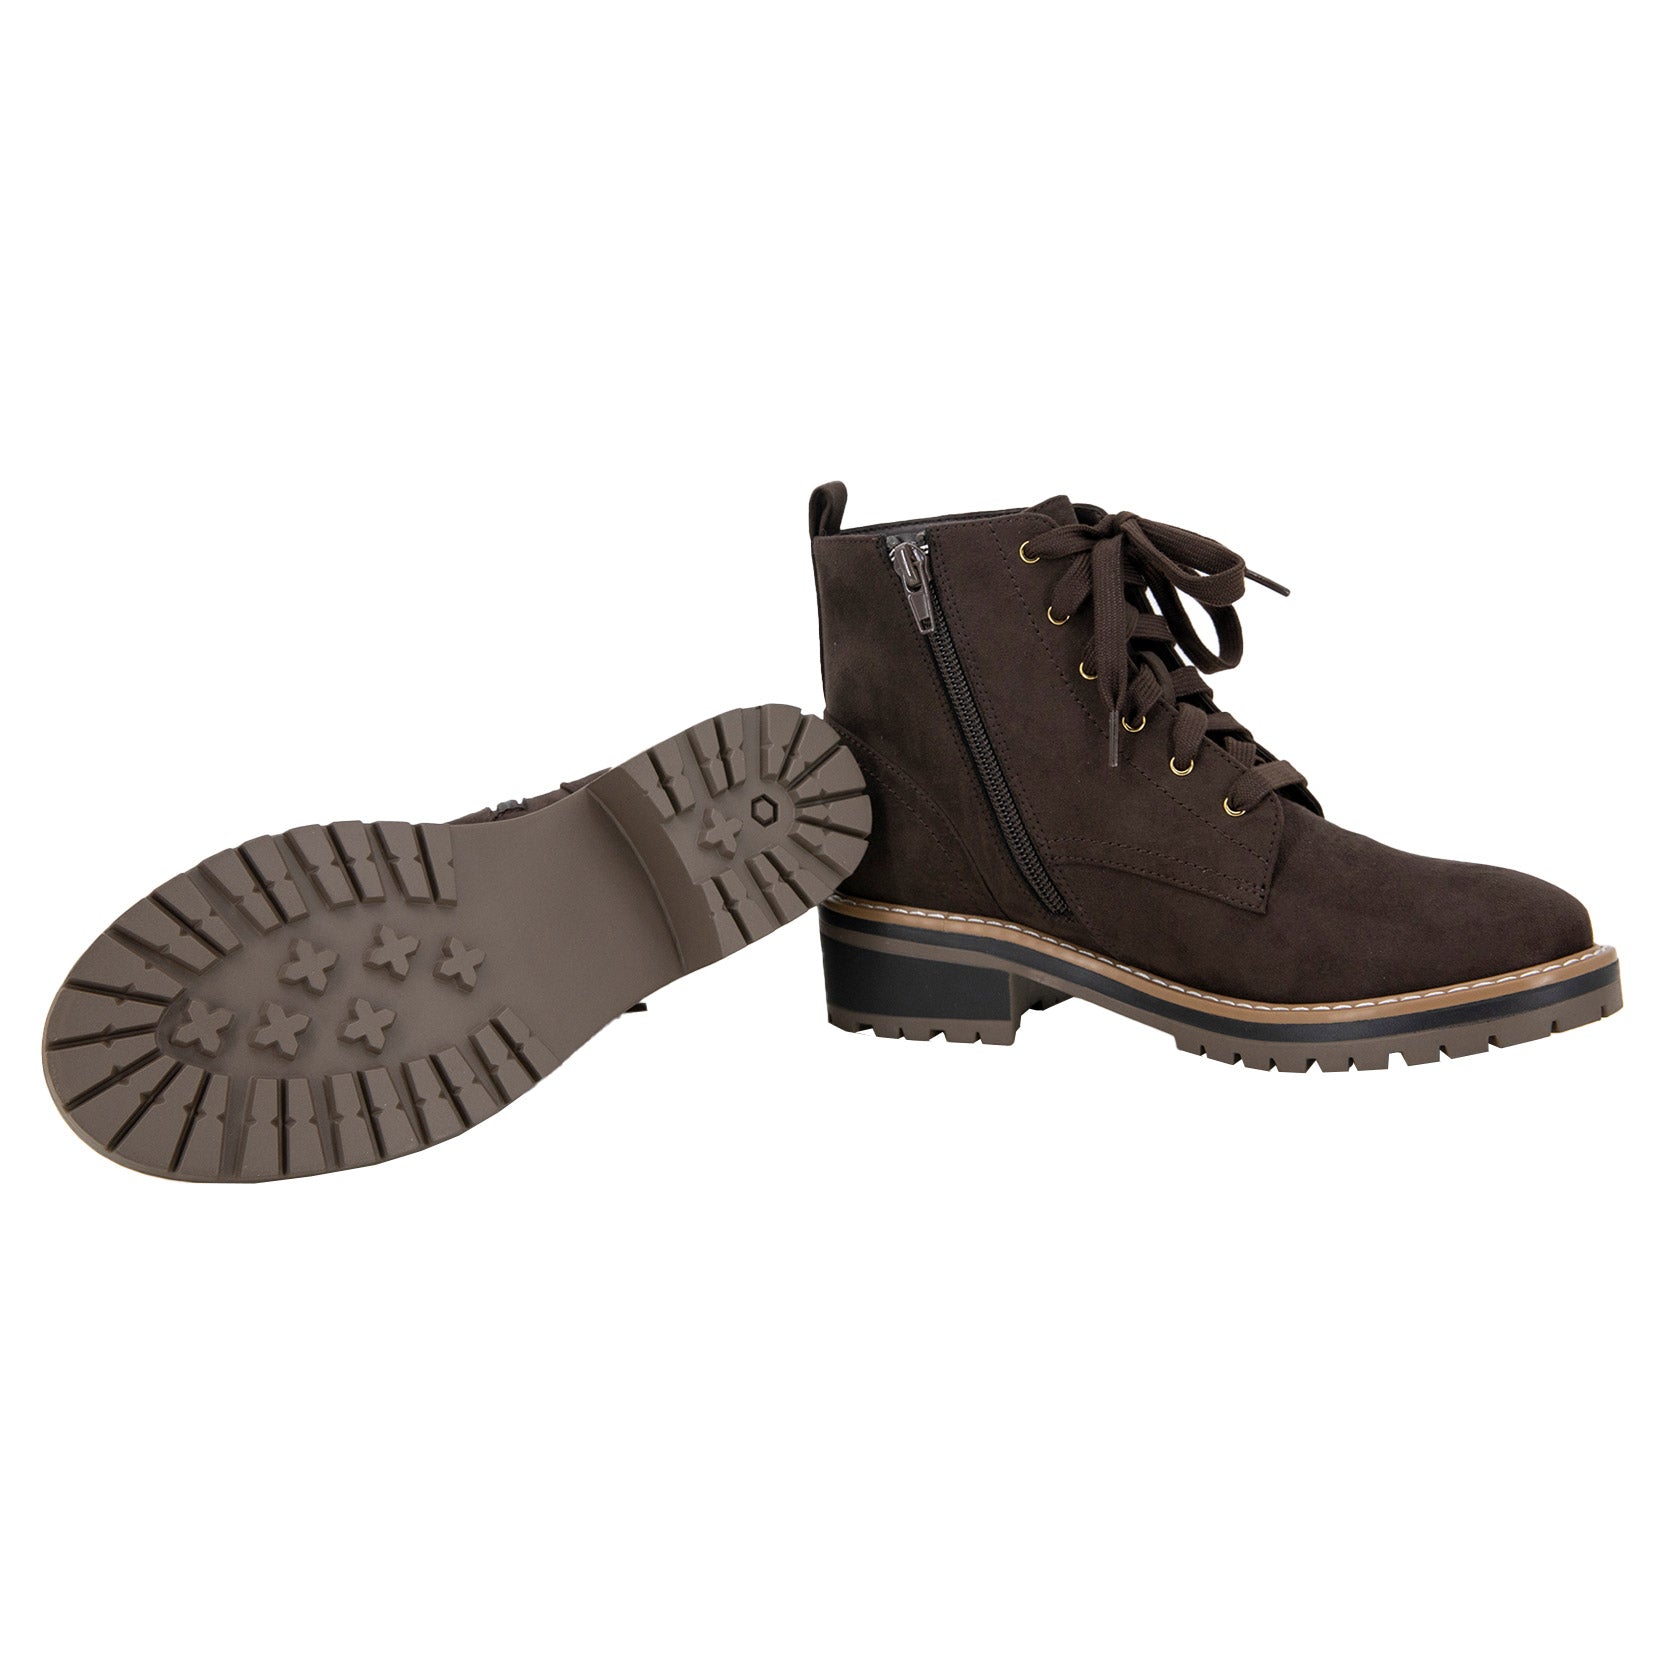 Ladies' Lace up Boot